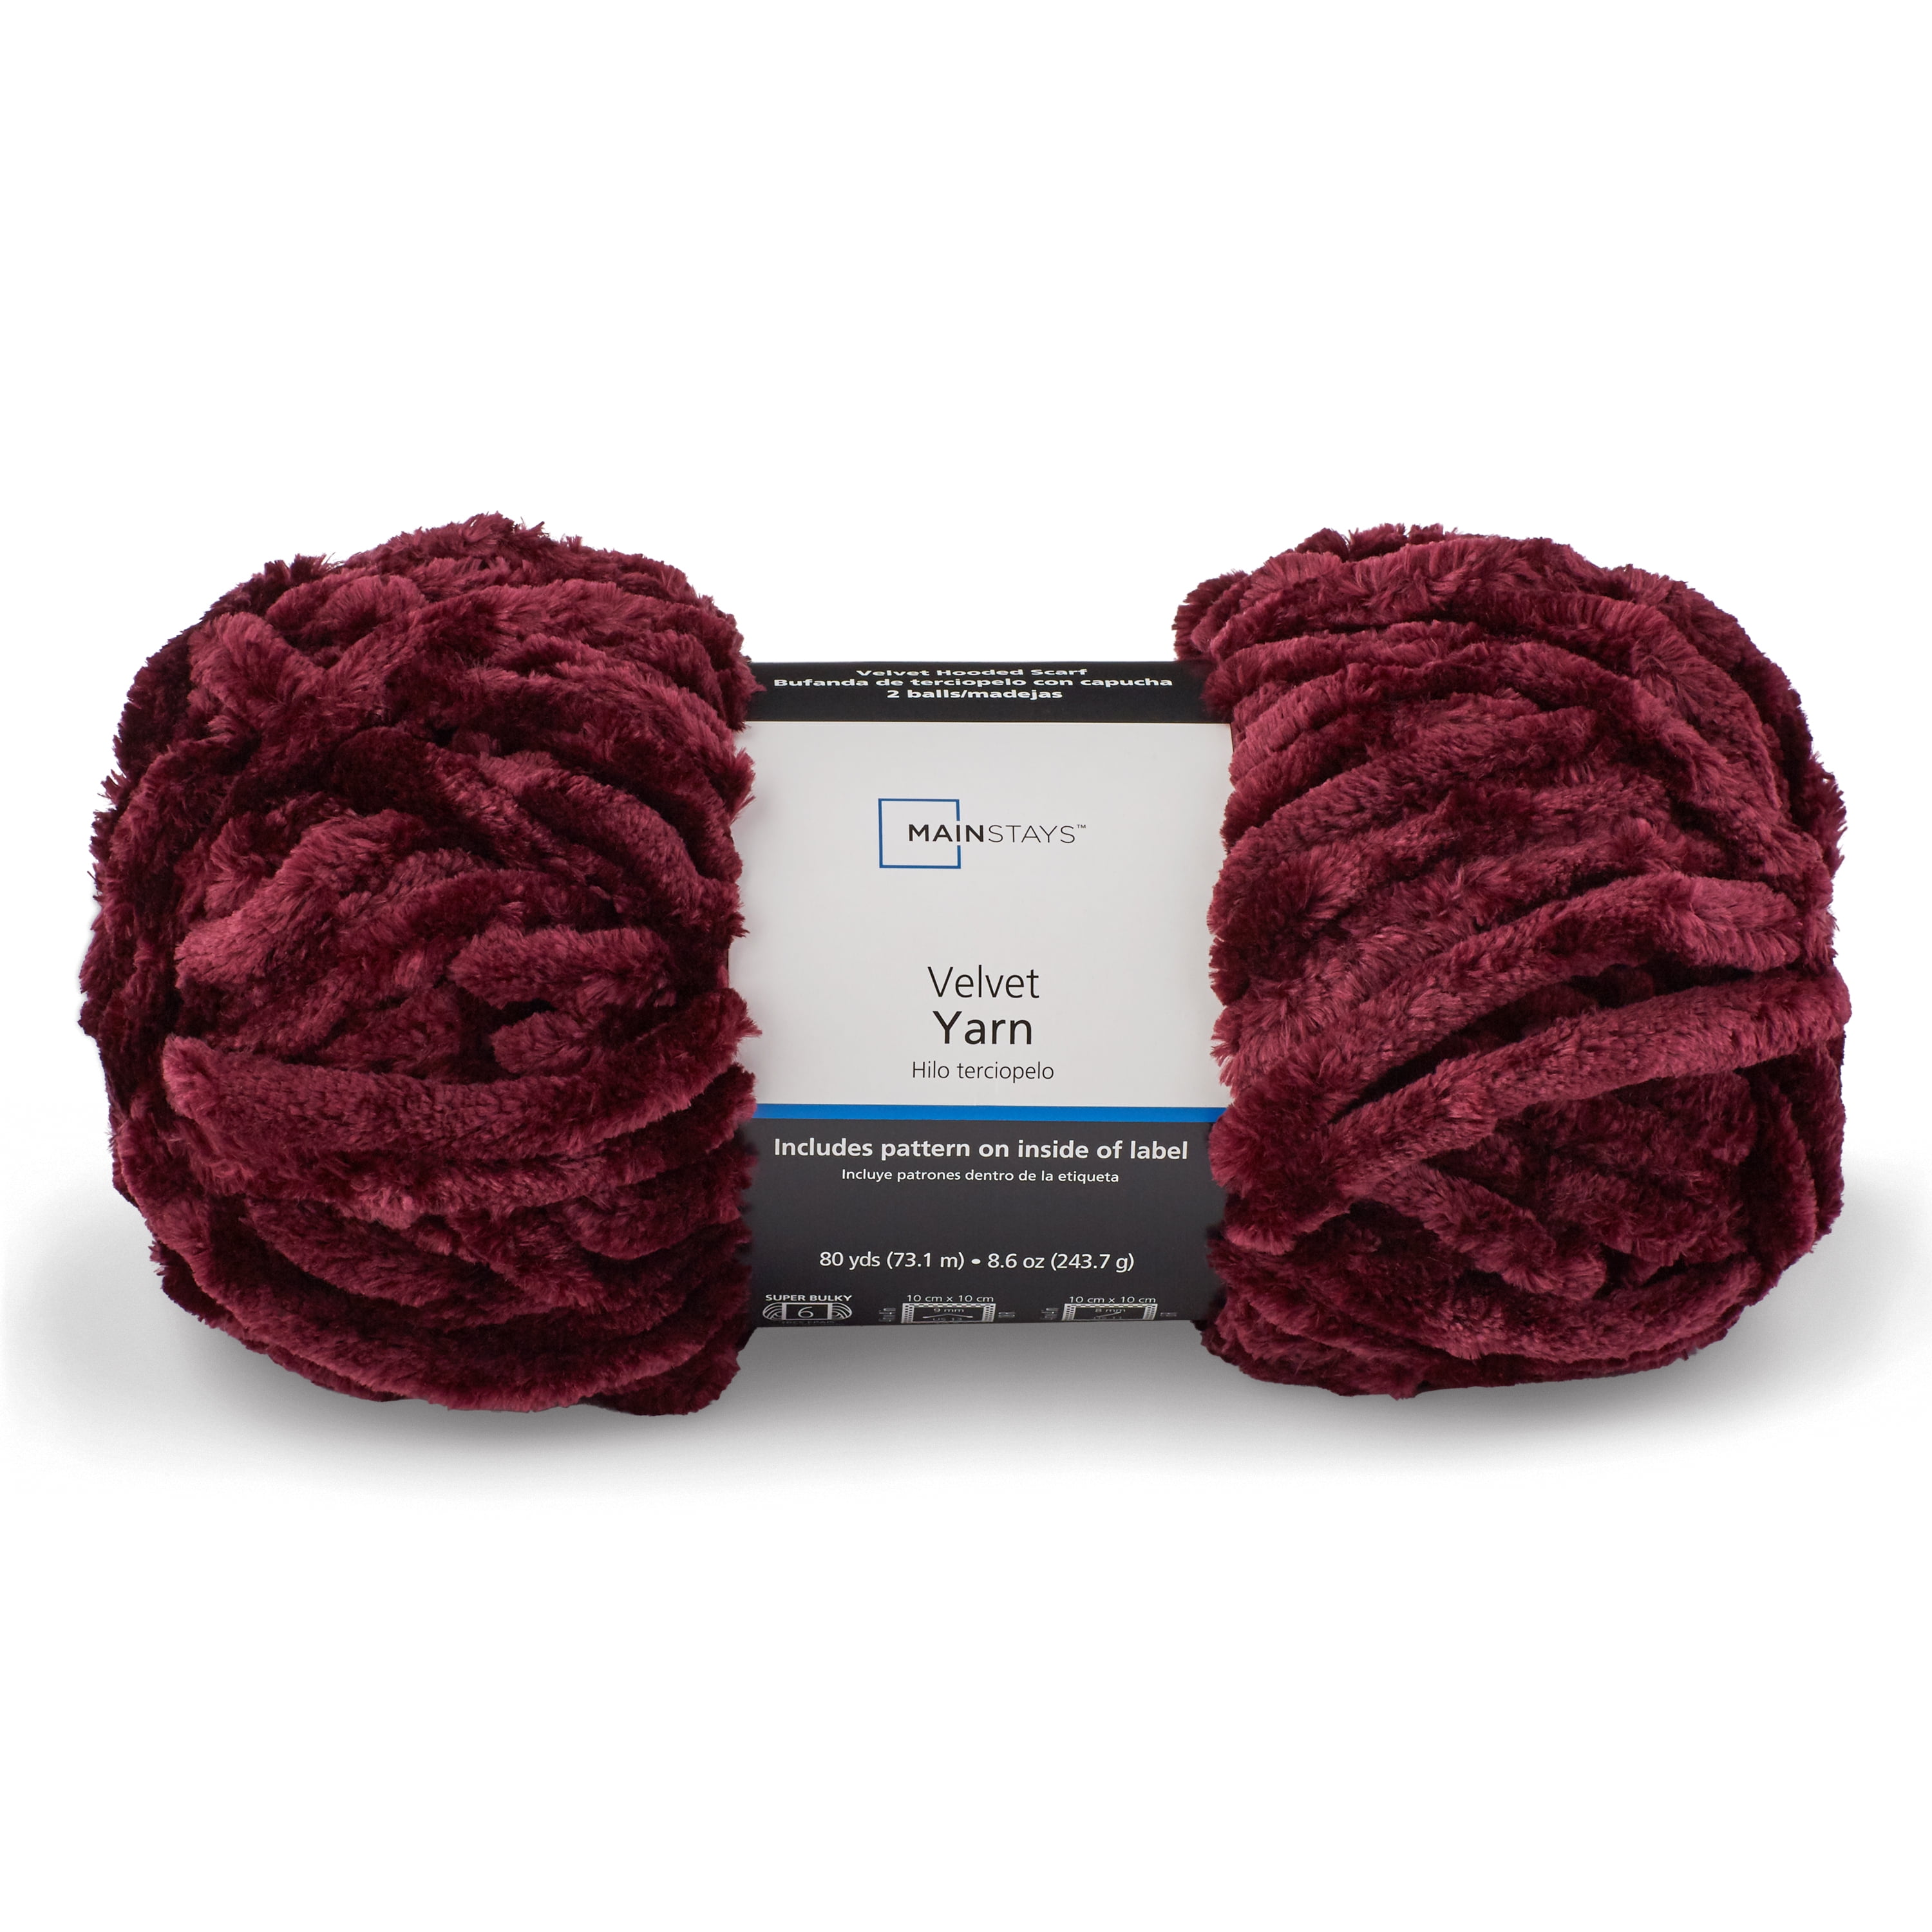 Mainstays 4 pack Chunky Yarn, Maroon/Wine, 1 is open - New